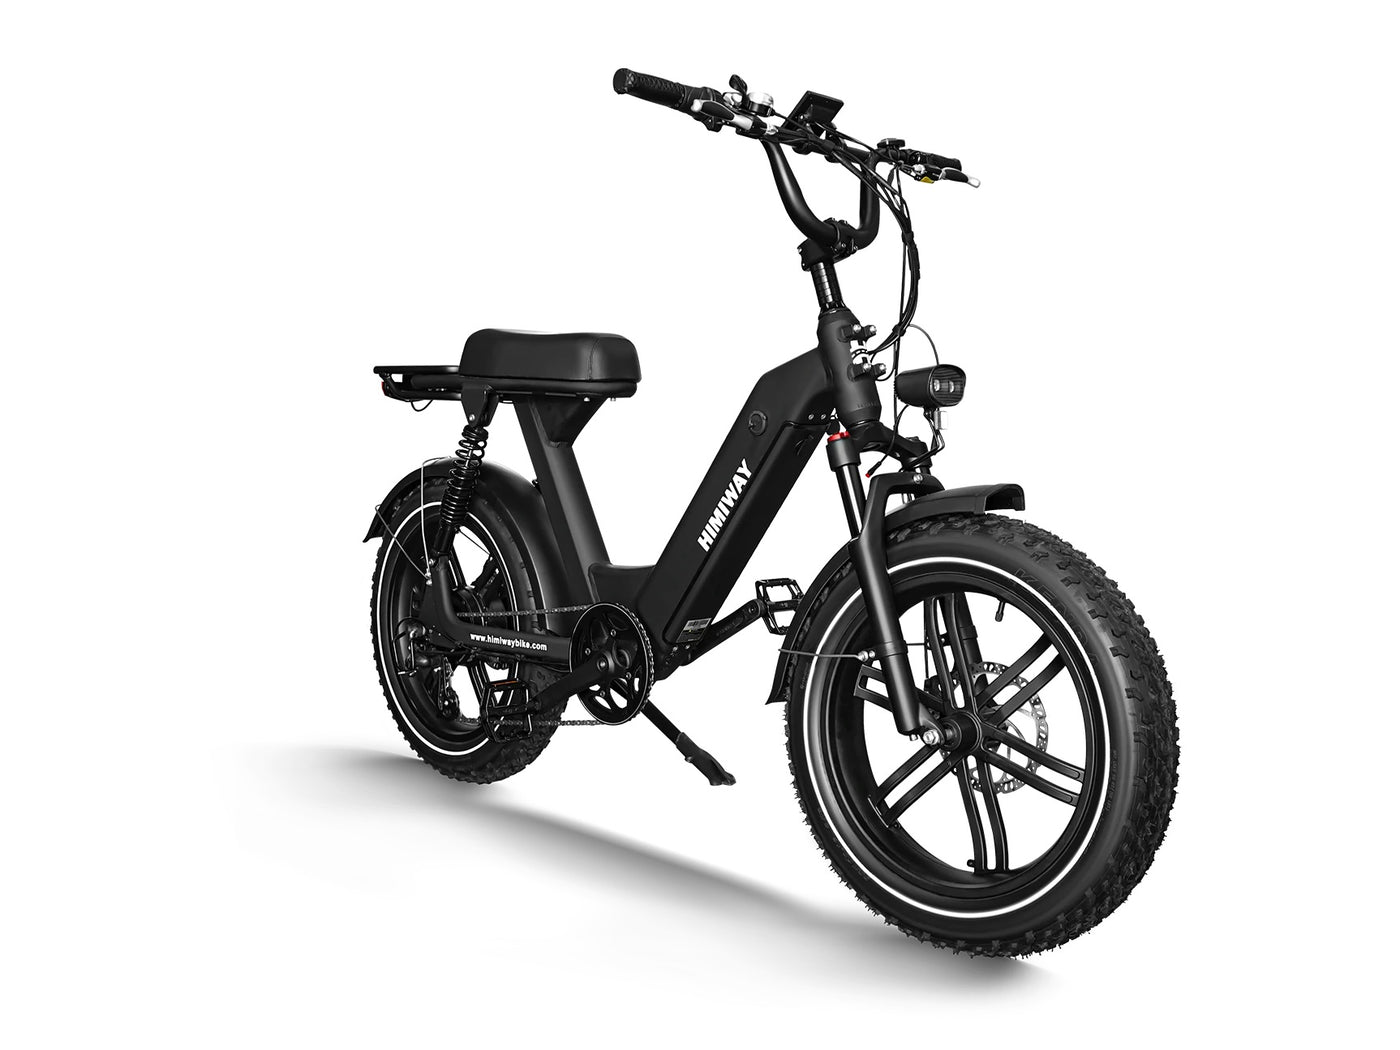 Himiway Escape Pro - 750w Moped Style eBike